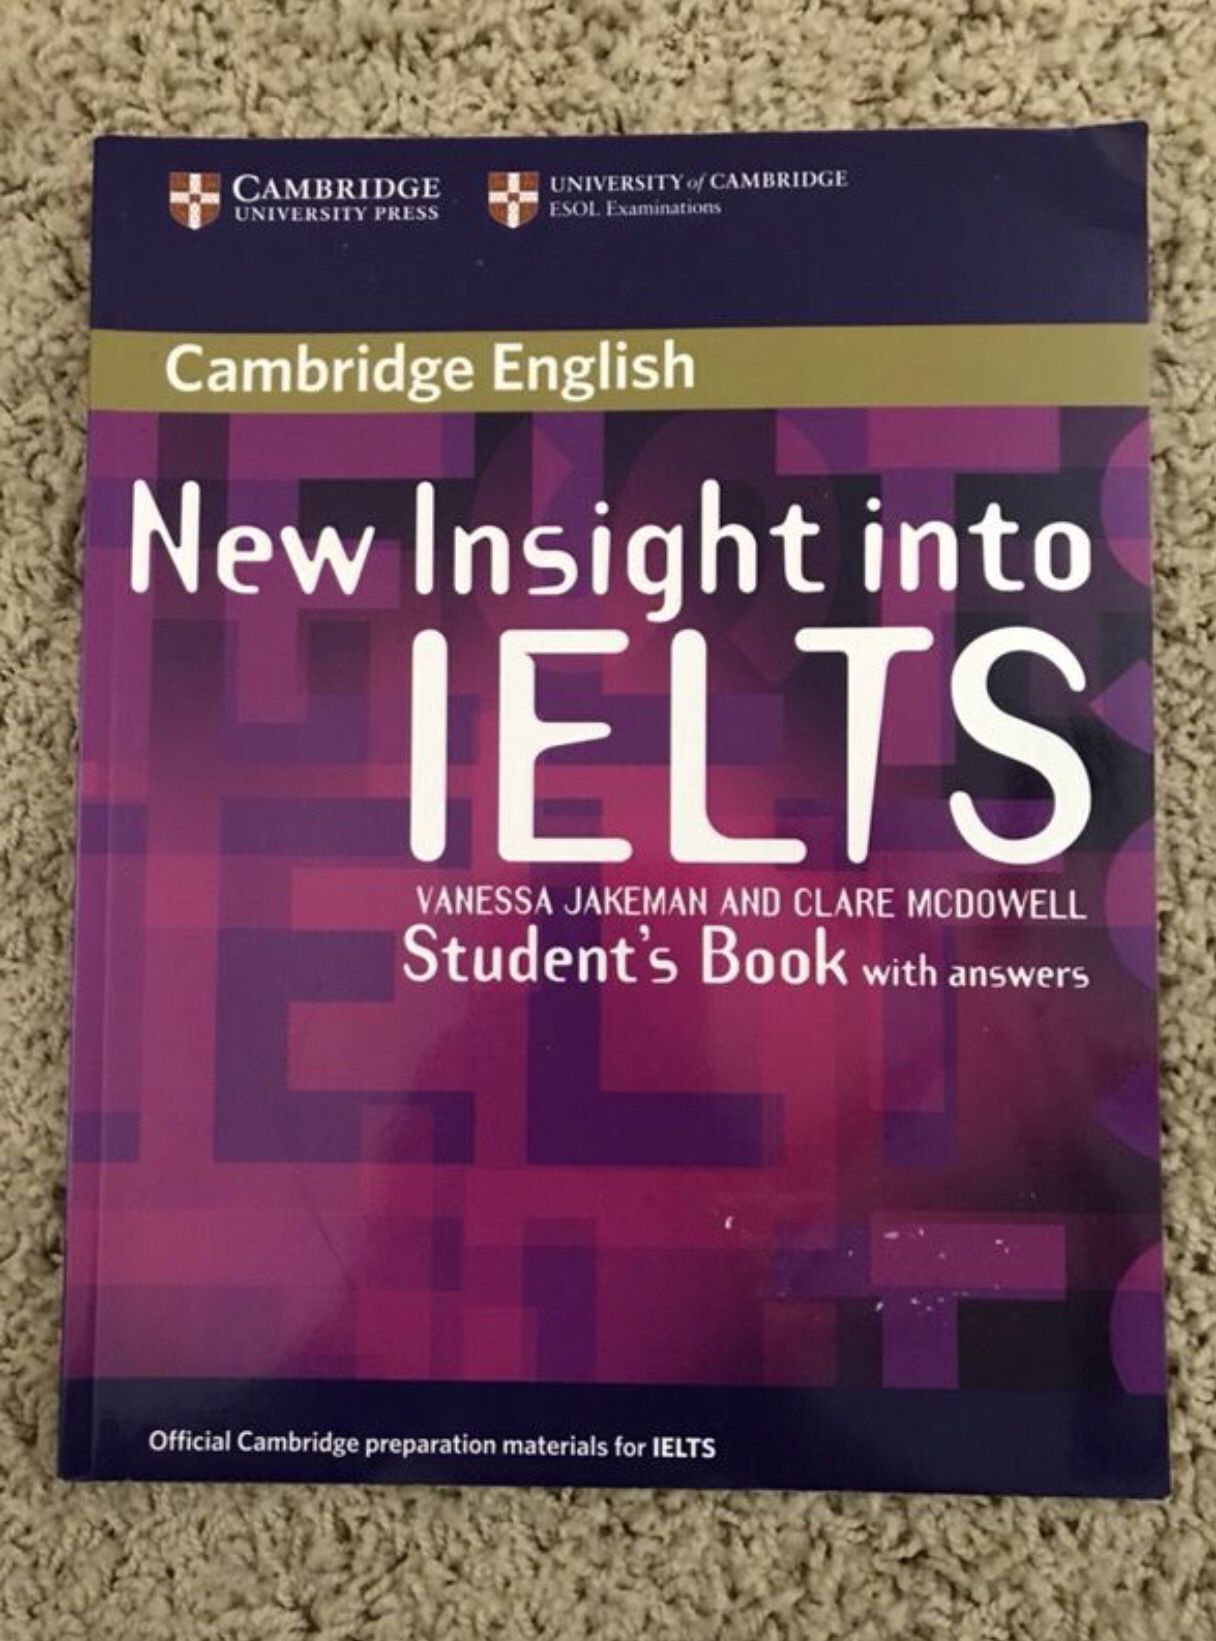 New Insight into IELTS Student's Book with Answers (Insights) Student Edition